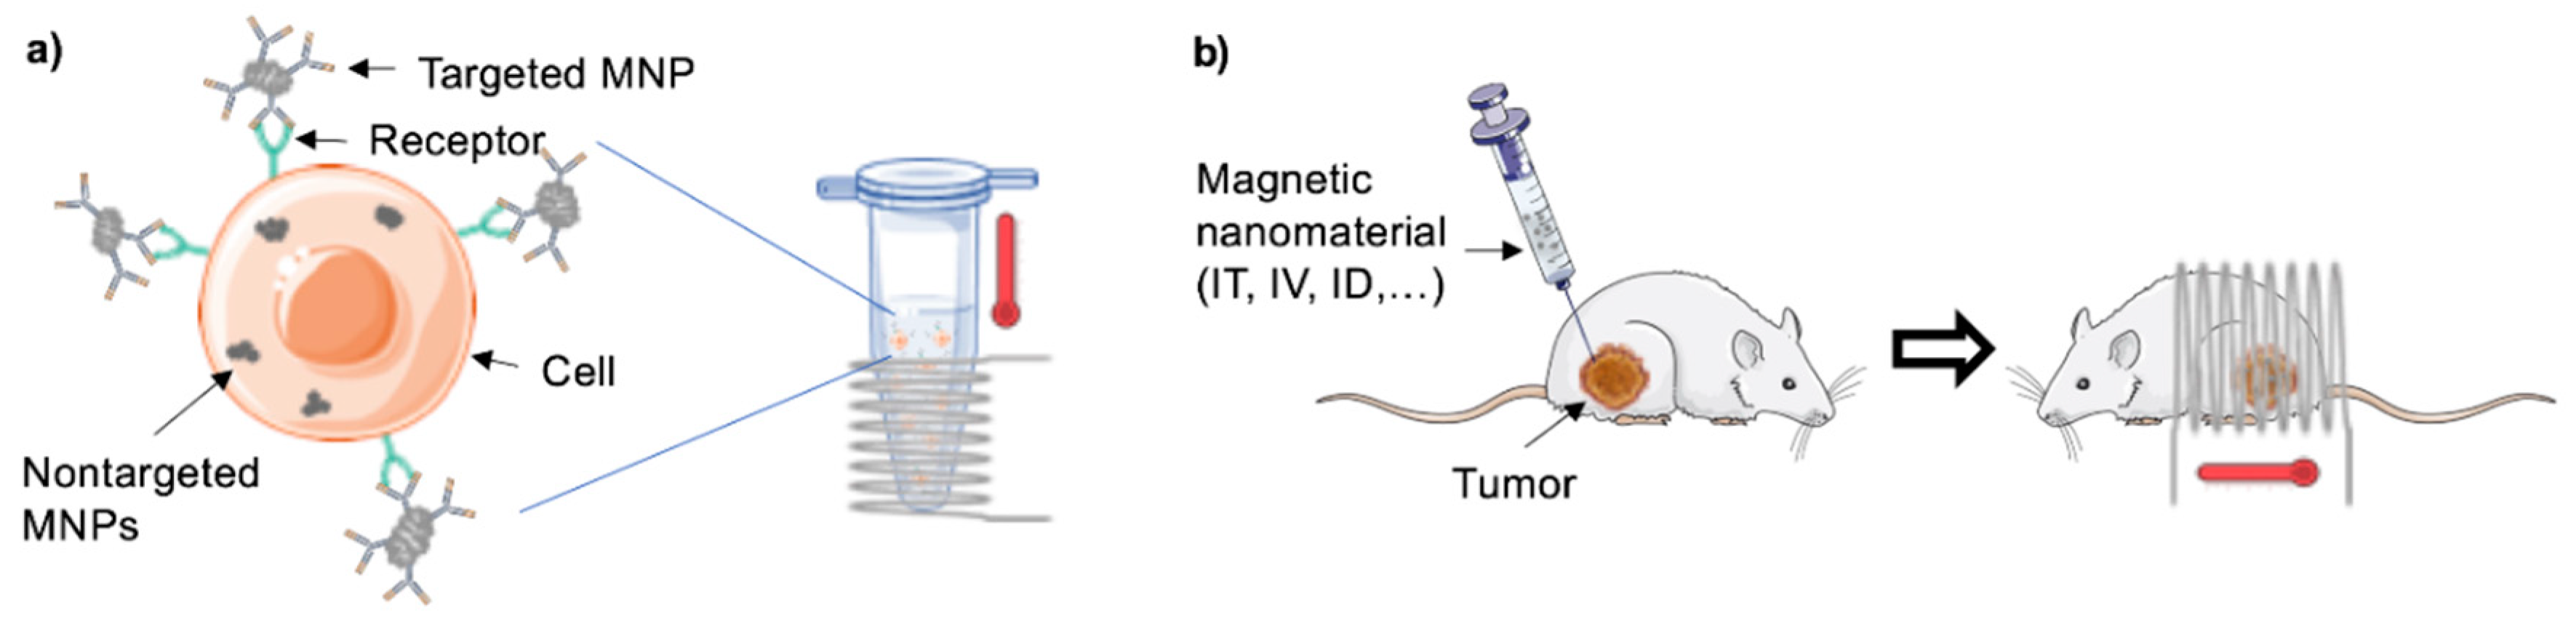 Molecules | Free Full-Text | Magnetic Hyperthermia for Cancer Treatment:  Main Parameters Affecting the Outcome of In Vitro and In Vivo Studies